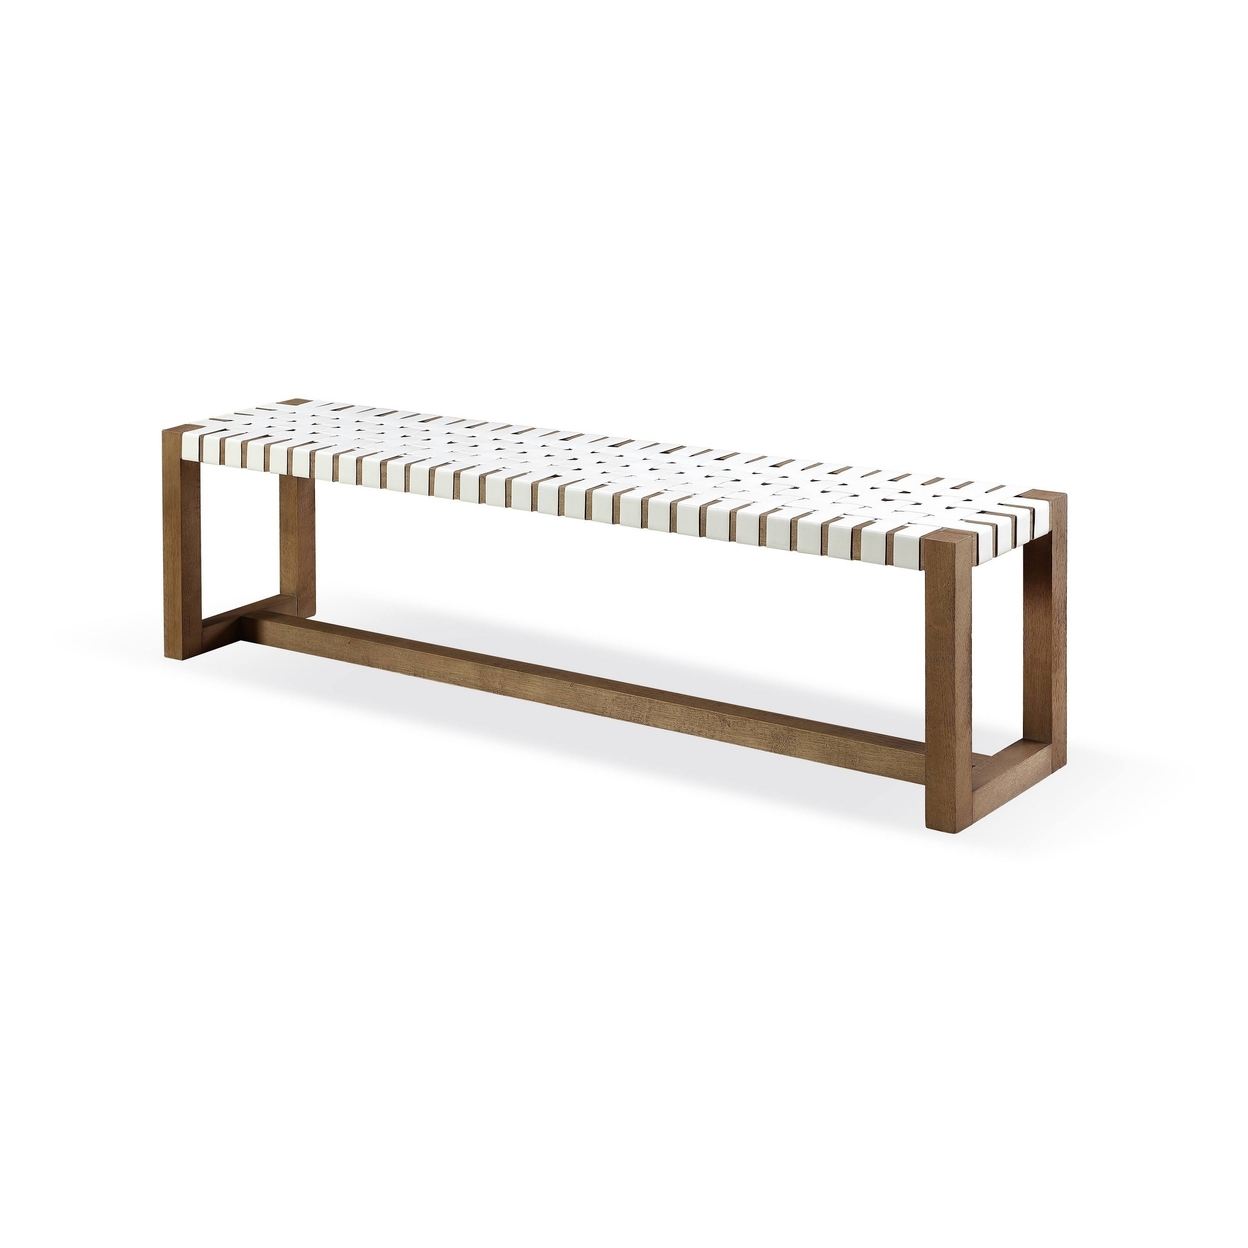 Rux 68 Inch Dining Bench With White Faux Leather Woven Seat, Brown Wood -Saltoro Sherpi